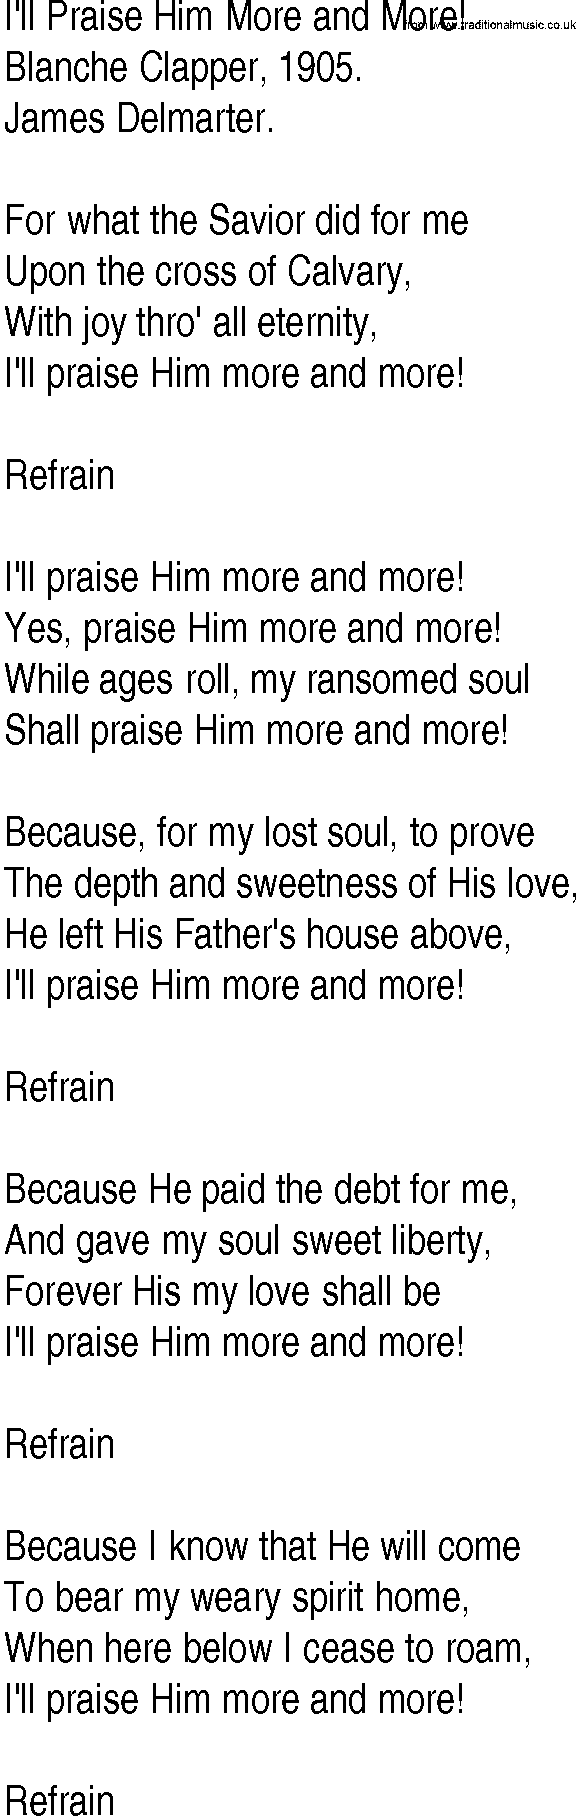 Hymn and Gospel Song: I'll Praise Him More and More! by Blanche Clapper lyrics